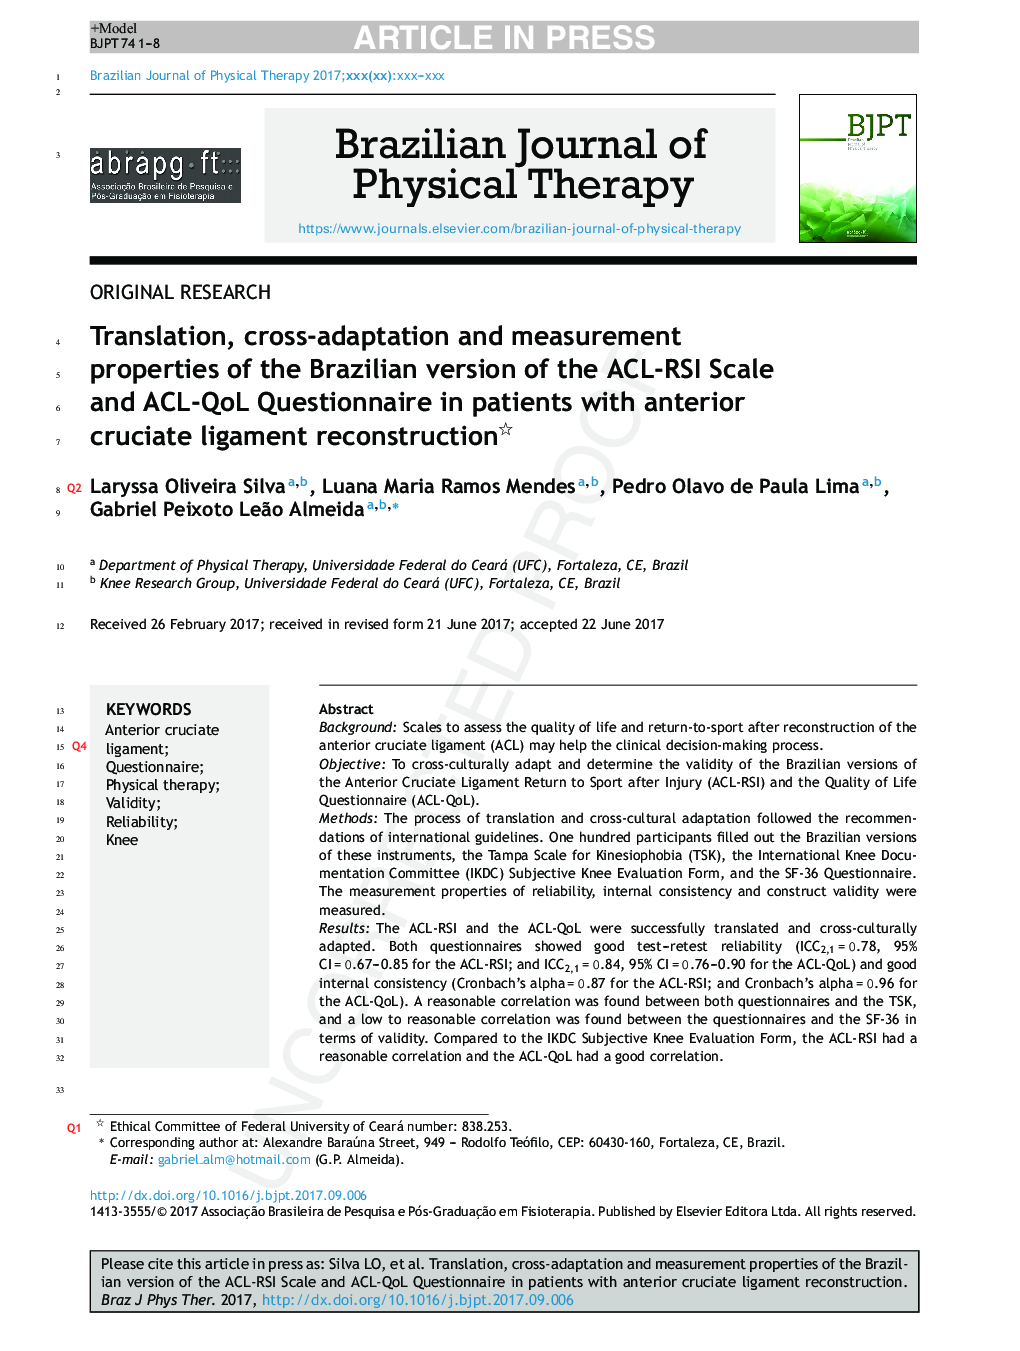 Translation, cross-adaptation and measurement properties of the Brazilian version of the ACL-RSI Scale and ACL-QoL Questionnaire in patients with anterior cruciate ligament reconstruction